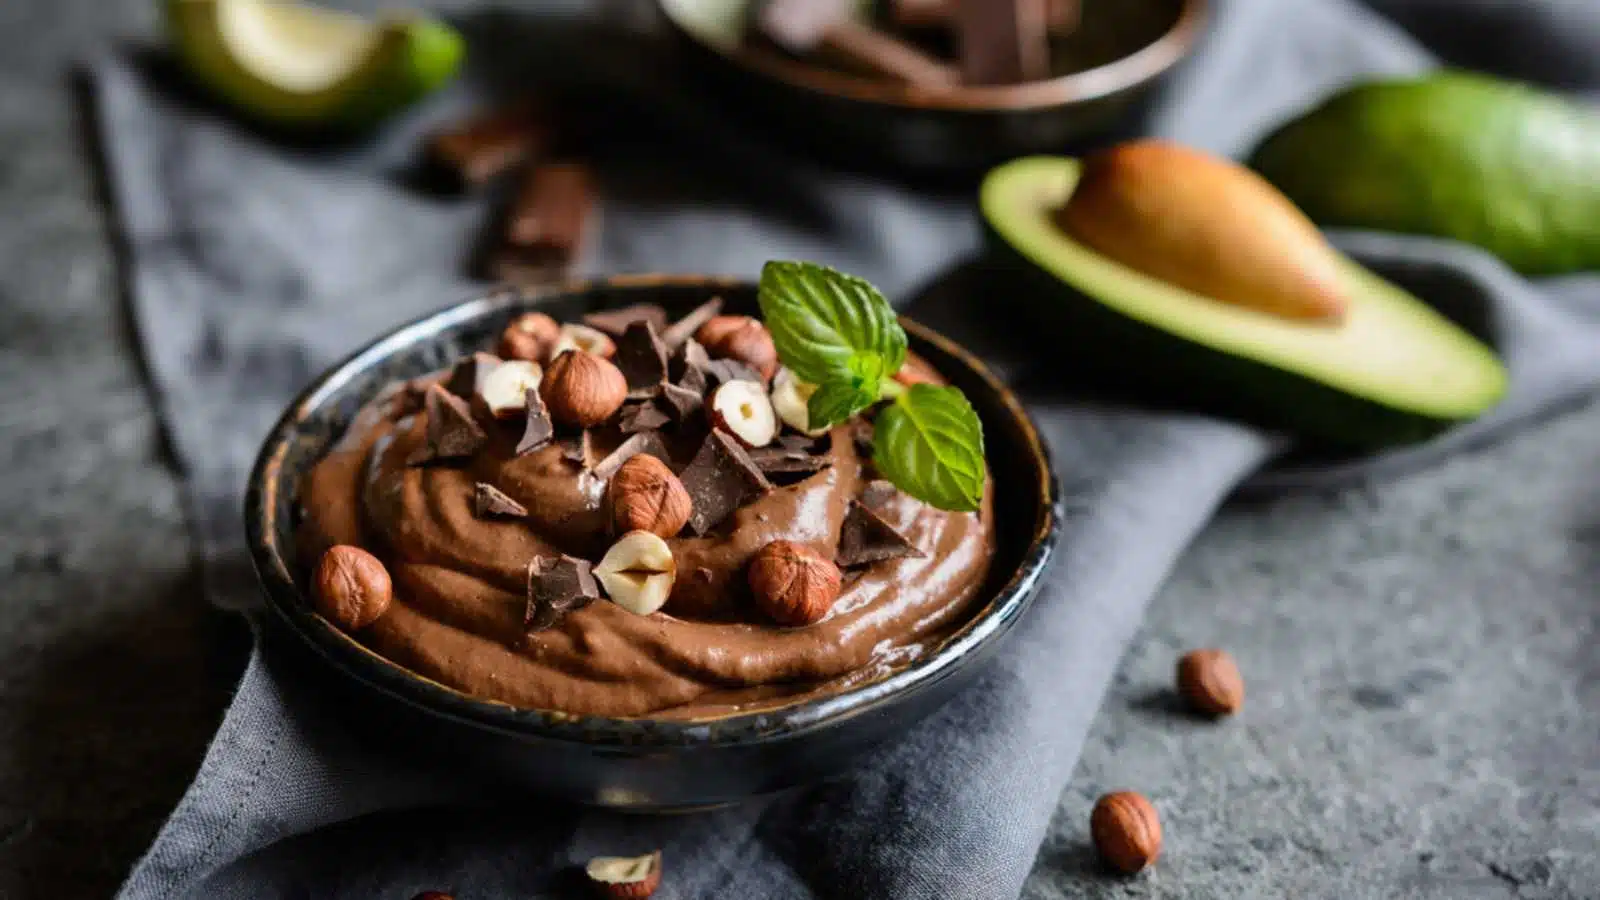 Raw avocado chocolate mousse topped with hazelnuts